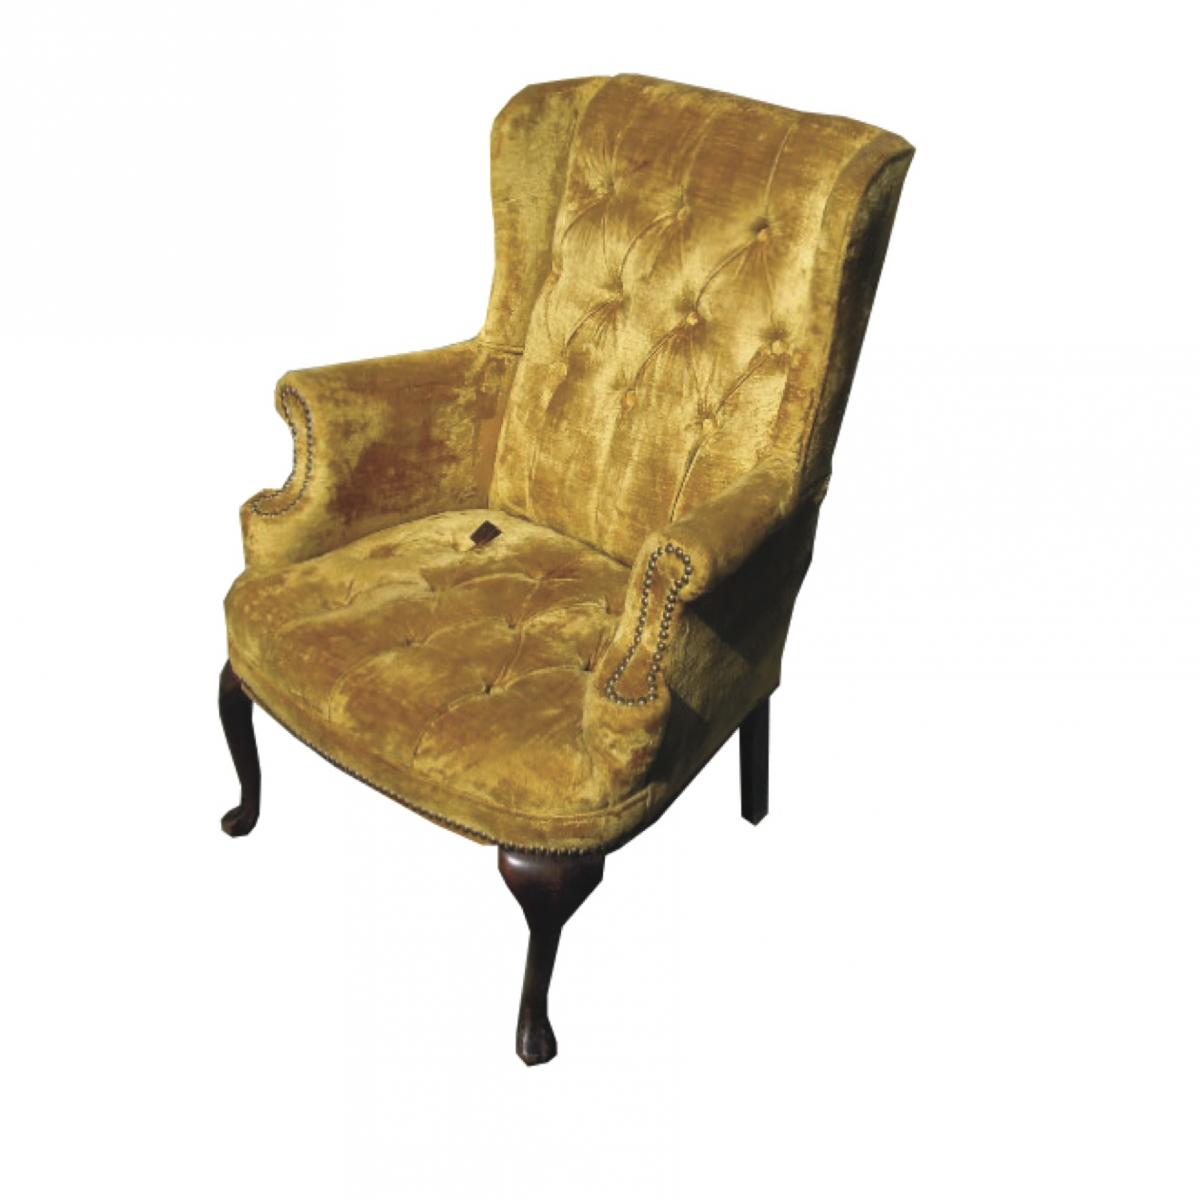 Reupholstered wing chair with tufting